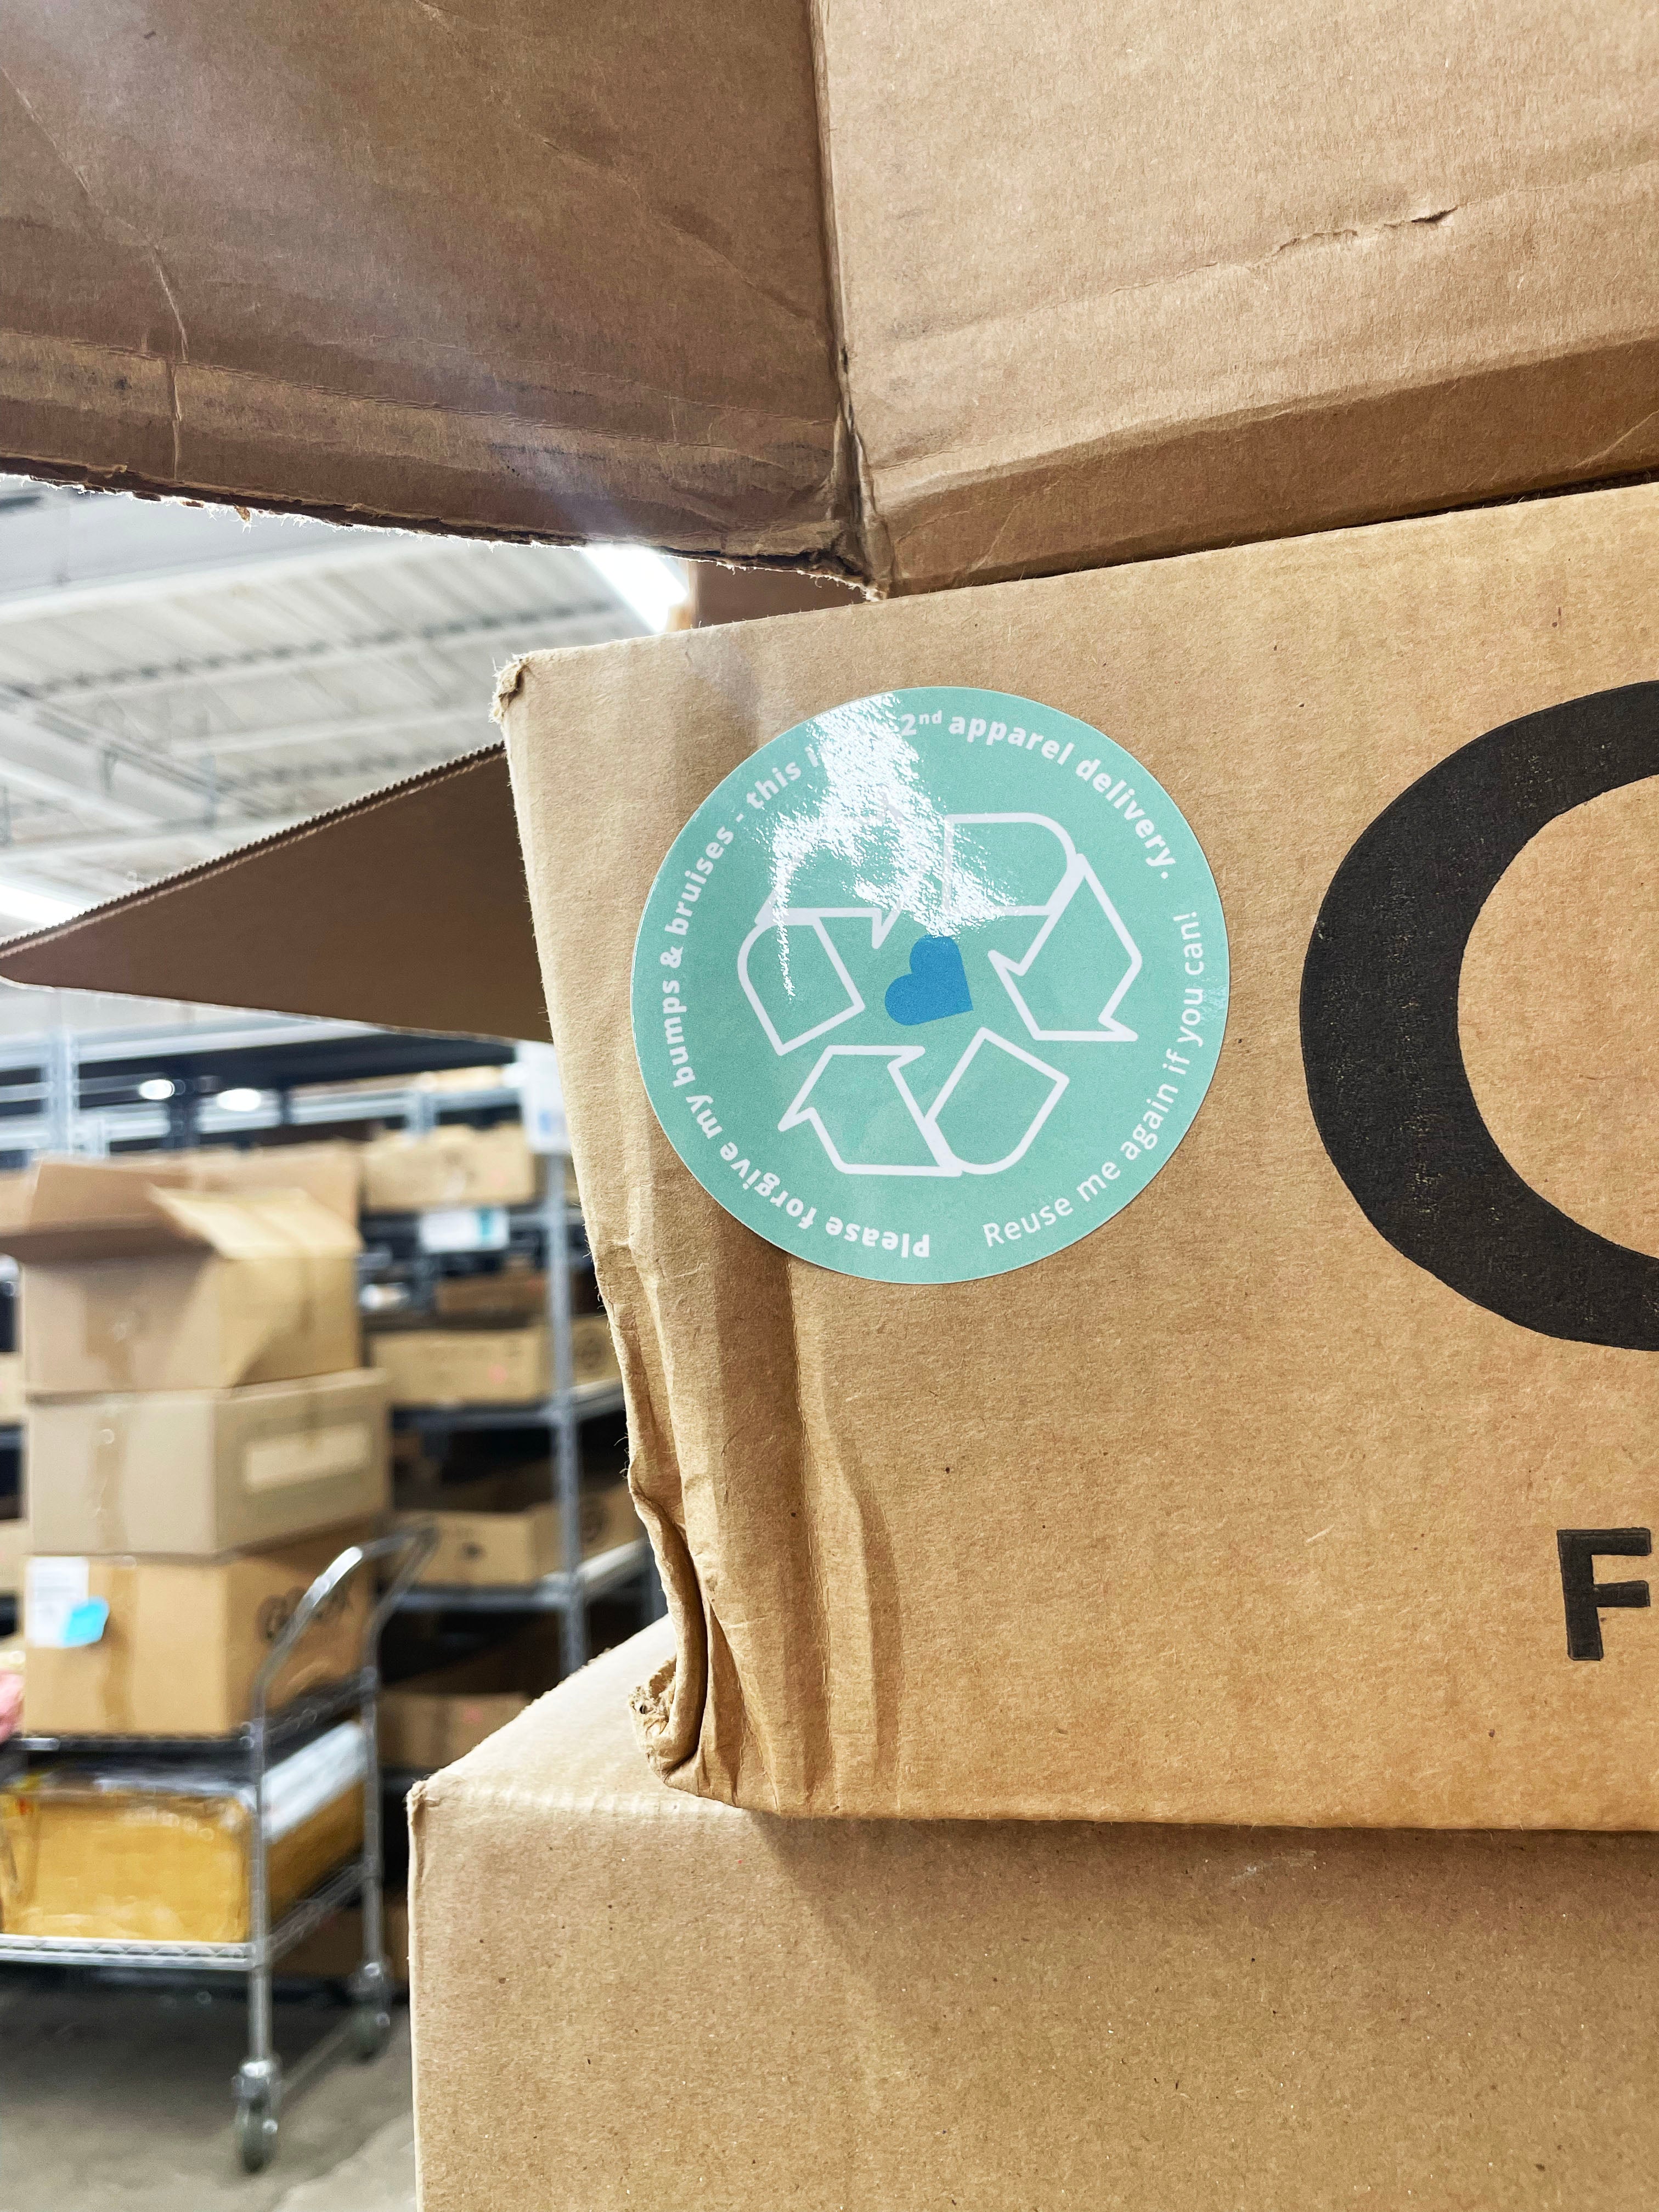 Close up image of GOEX recycle sticker on cardboard box